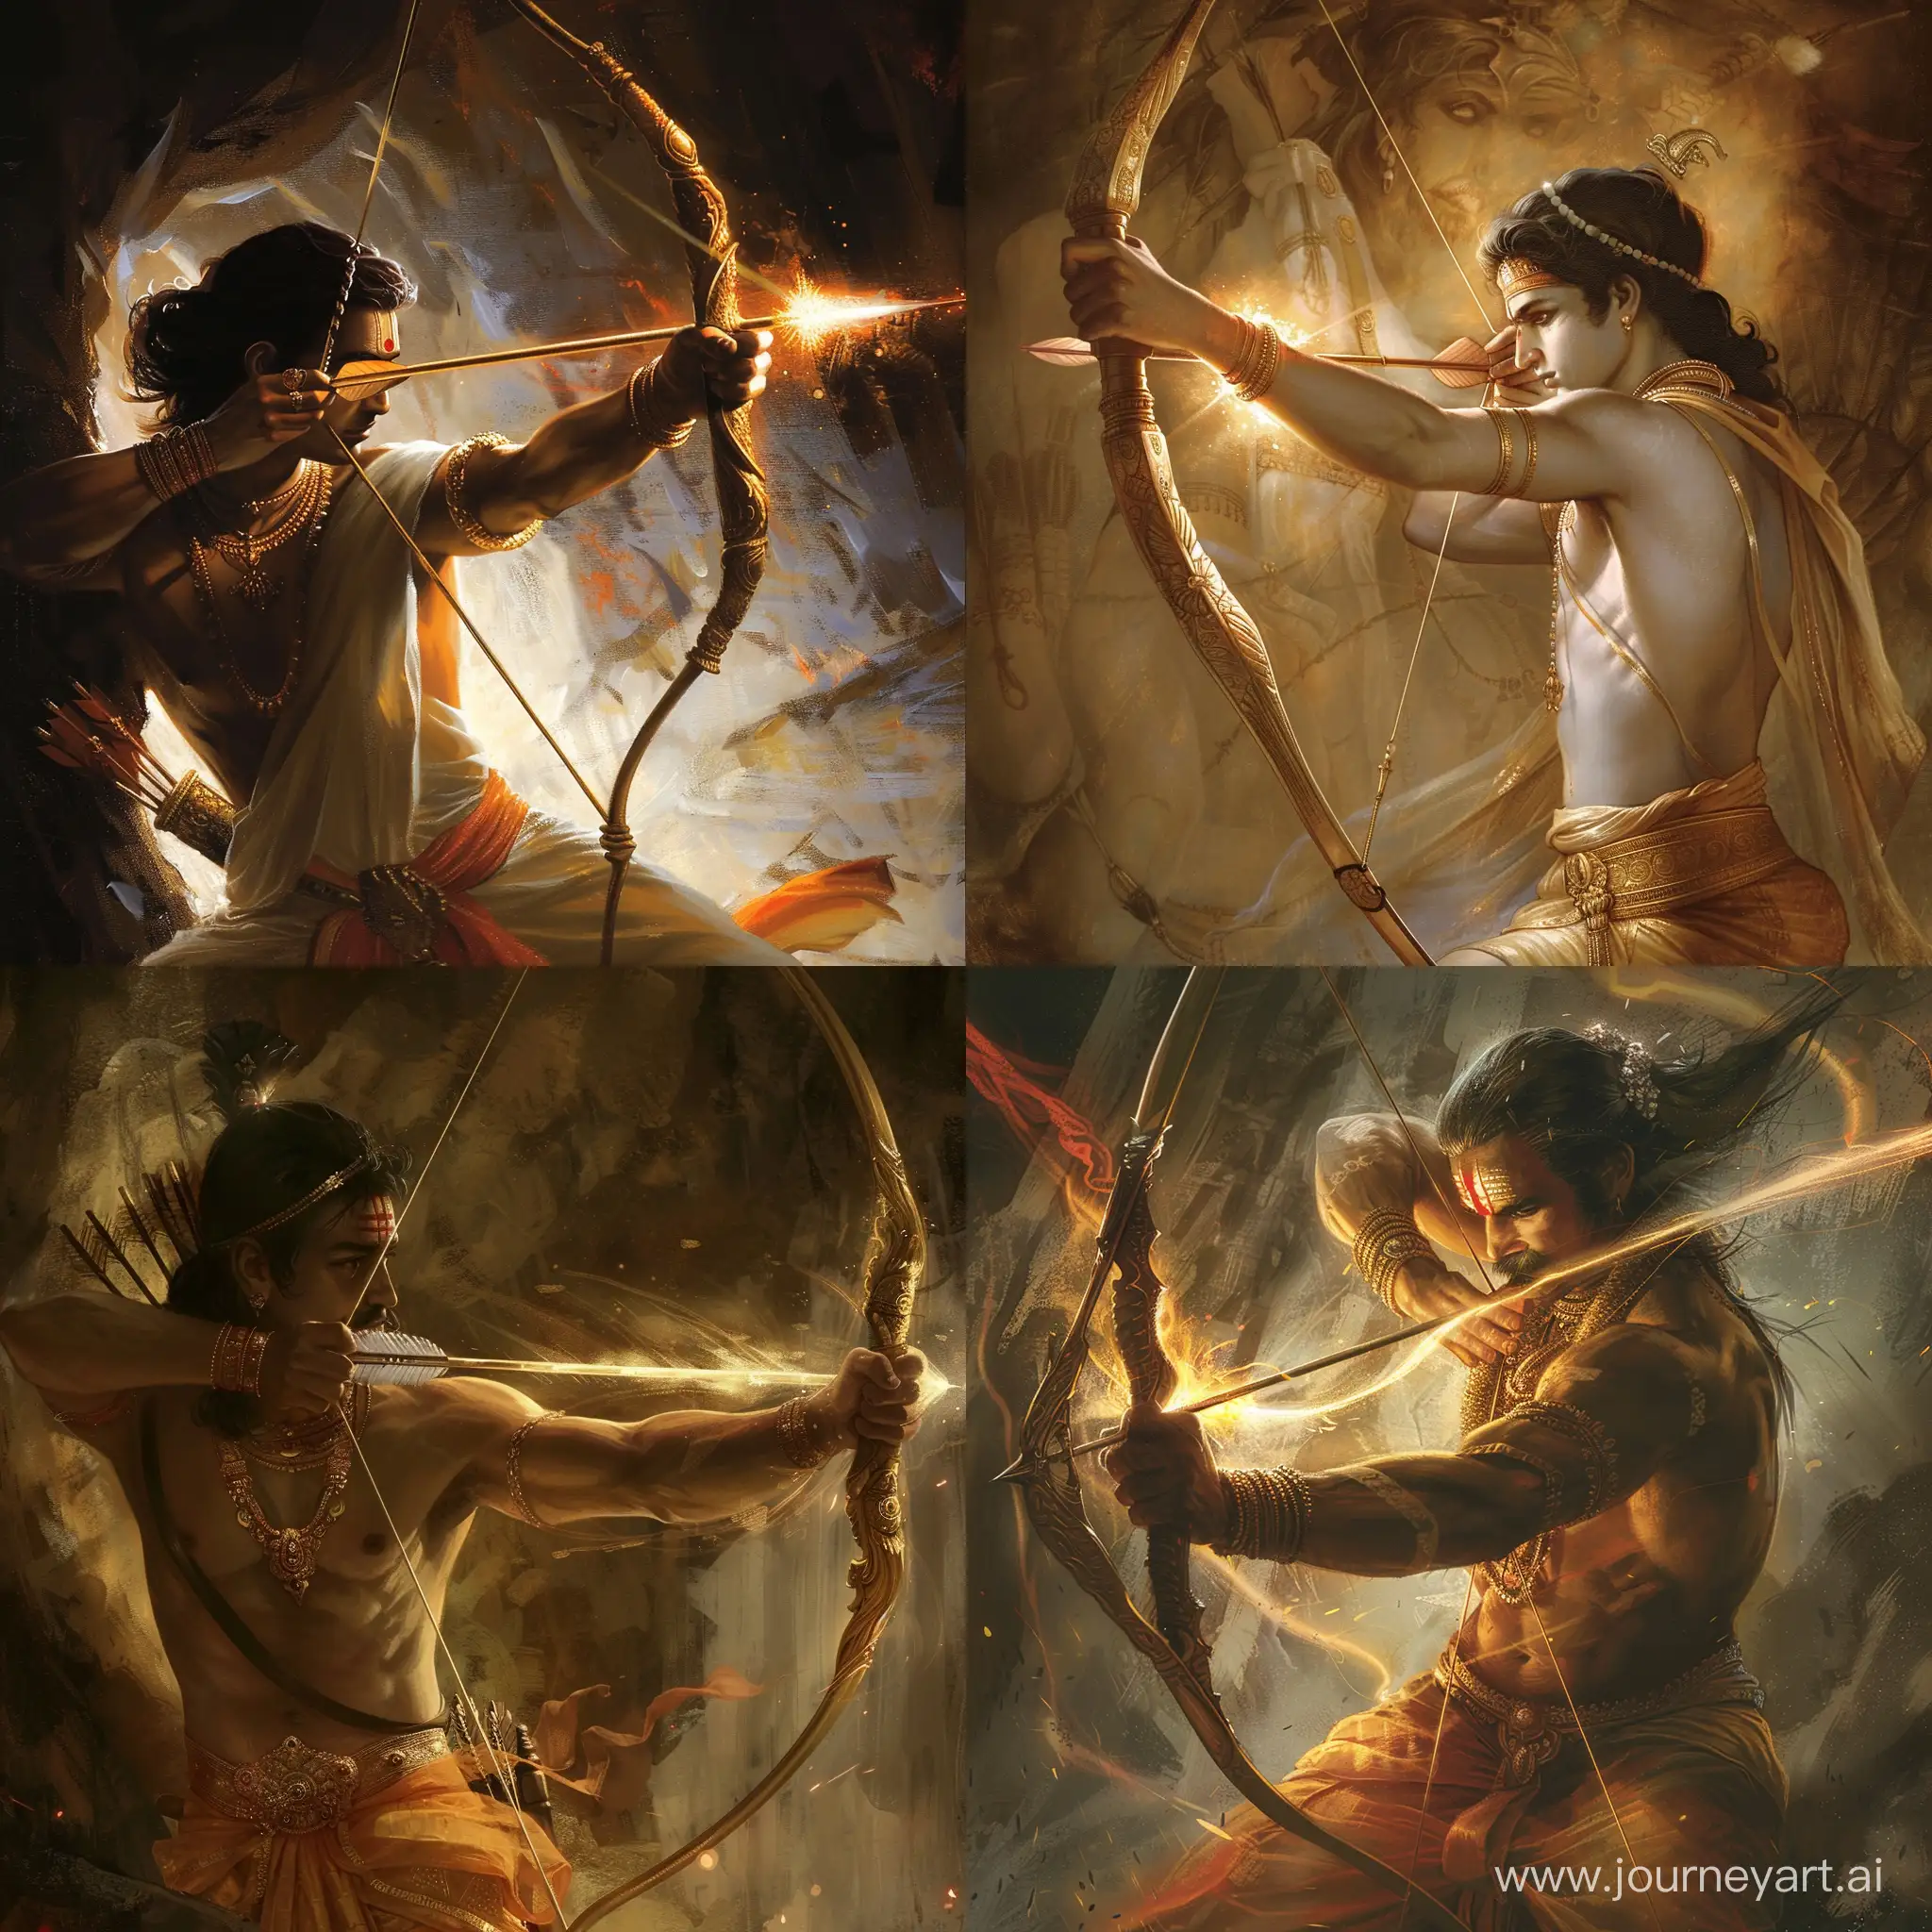 Lord Rama holds a magnificent bow, its craftsmanship reflecting the divine power it holds. With unwavering focus and a tranquil expression, he pulls the bowstring, guiding an arrow that seems to glow with a celestial light.